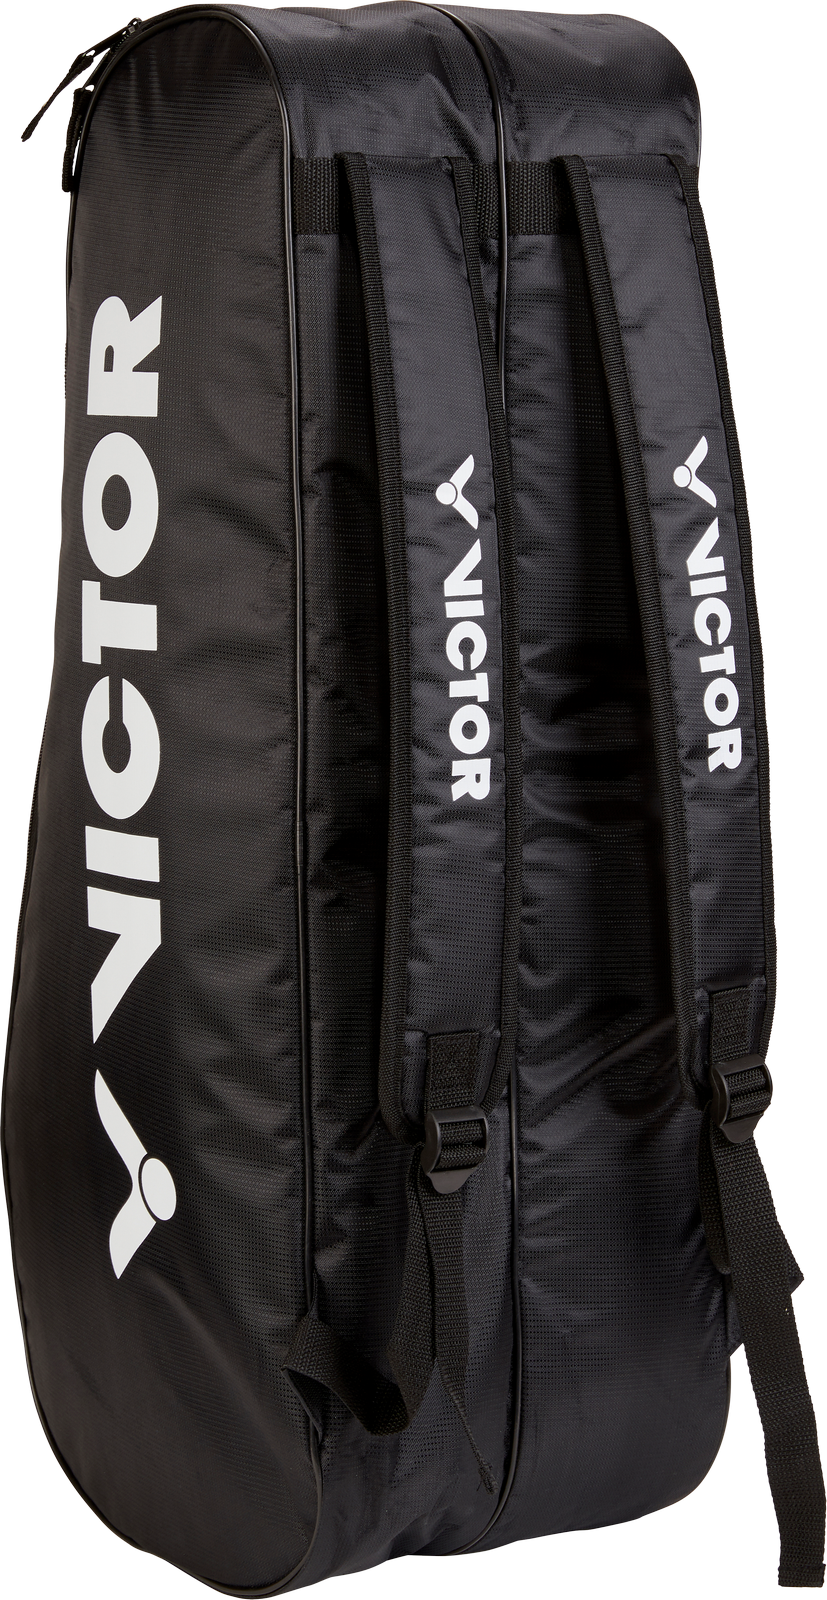 doublethermobag noir 9150c 4.png